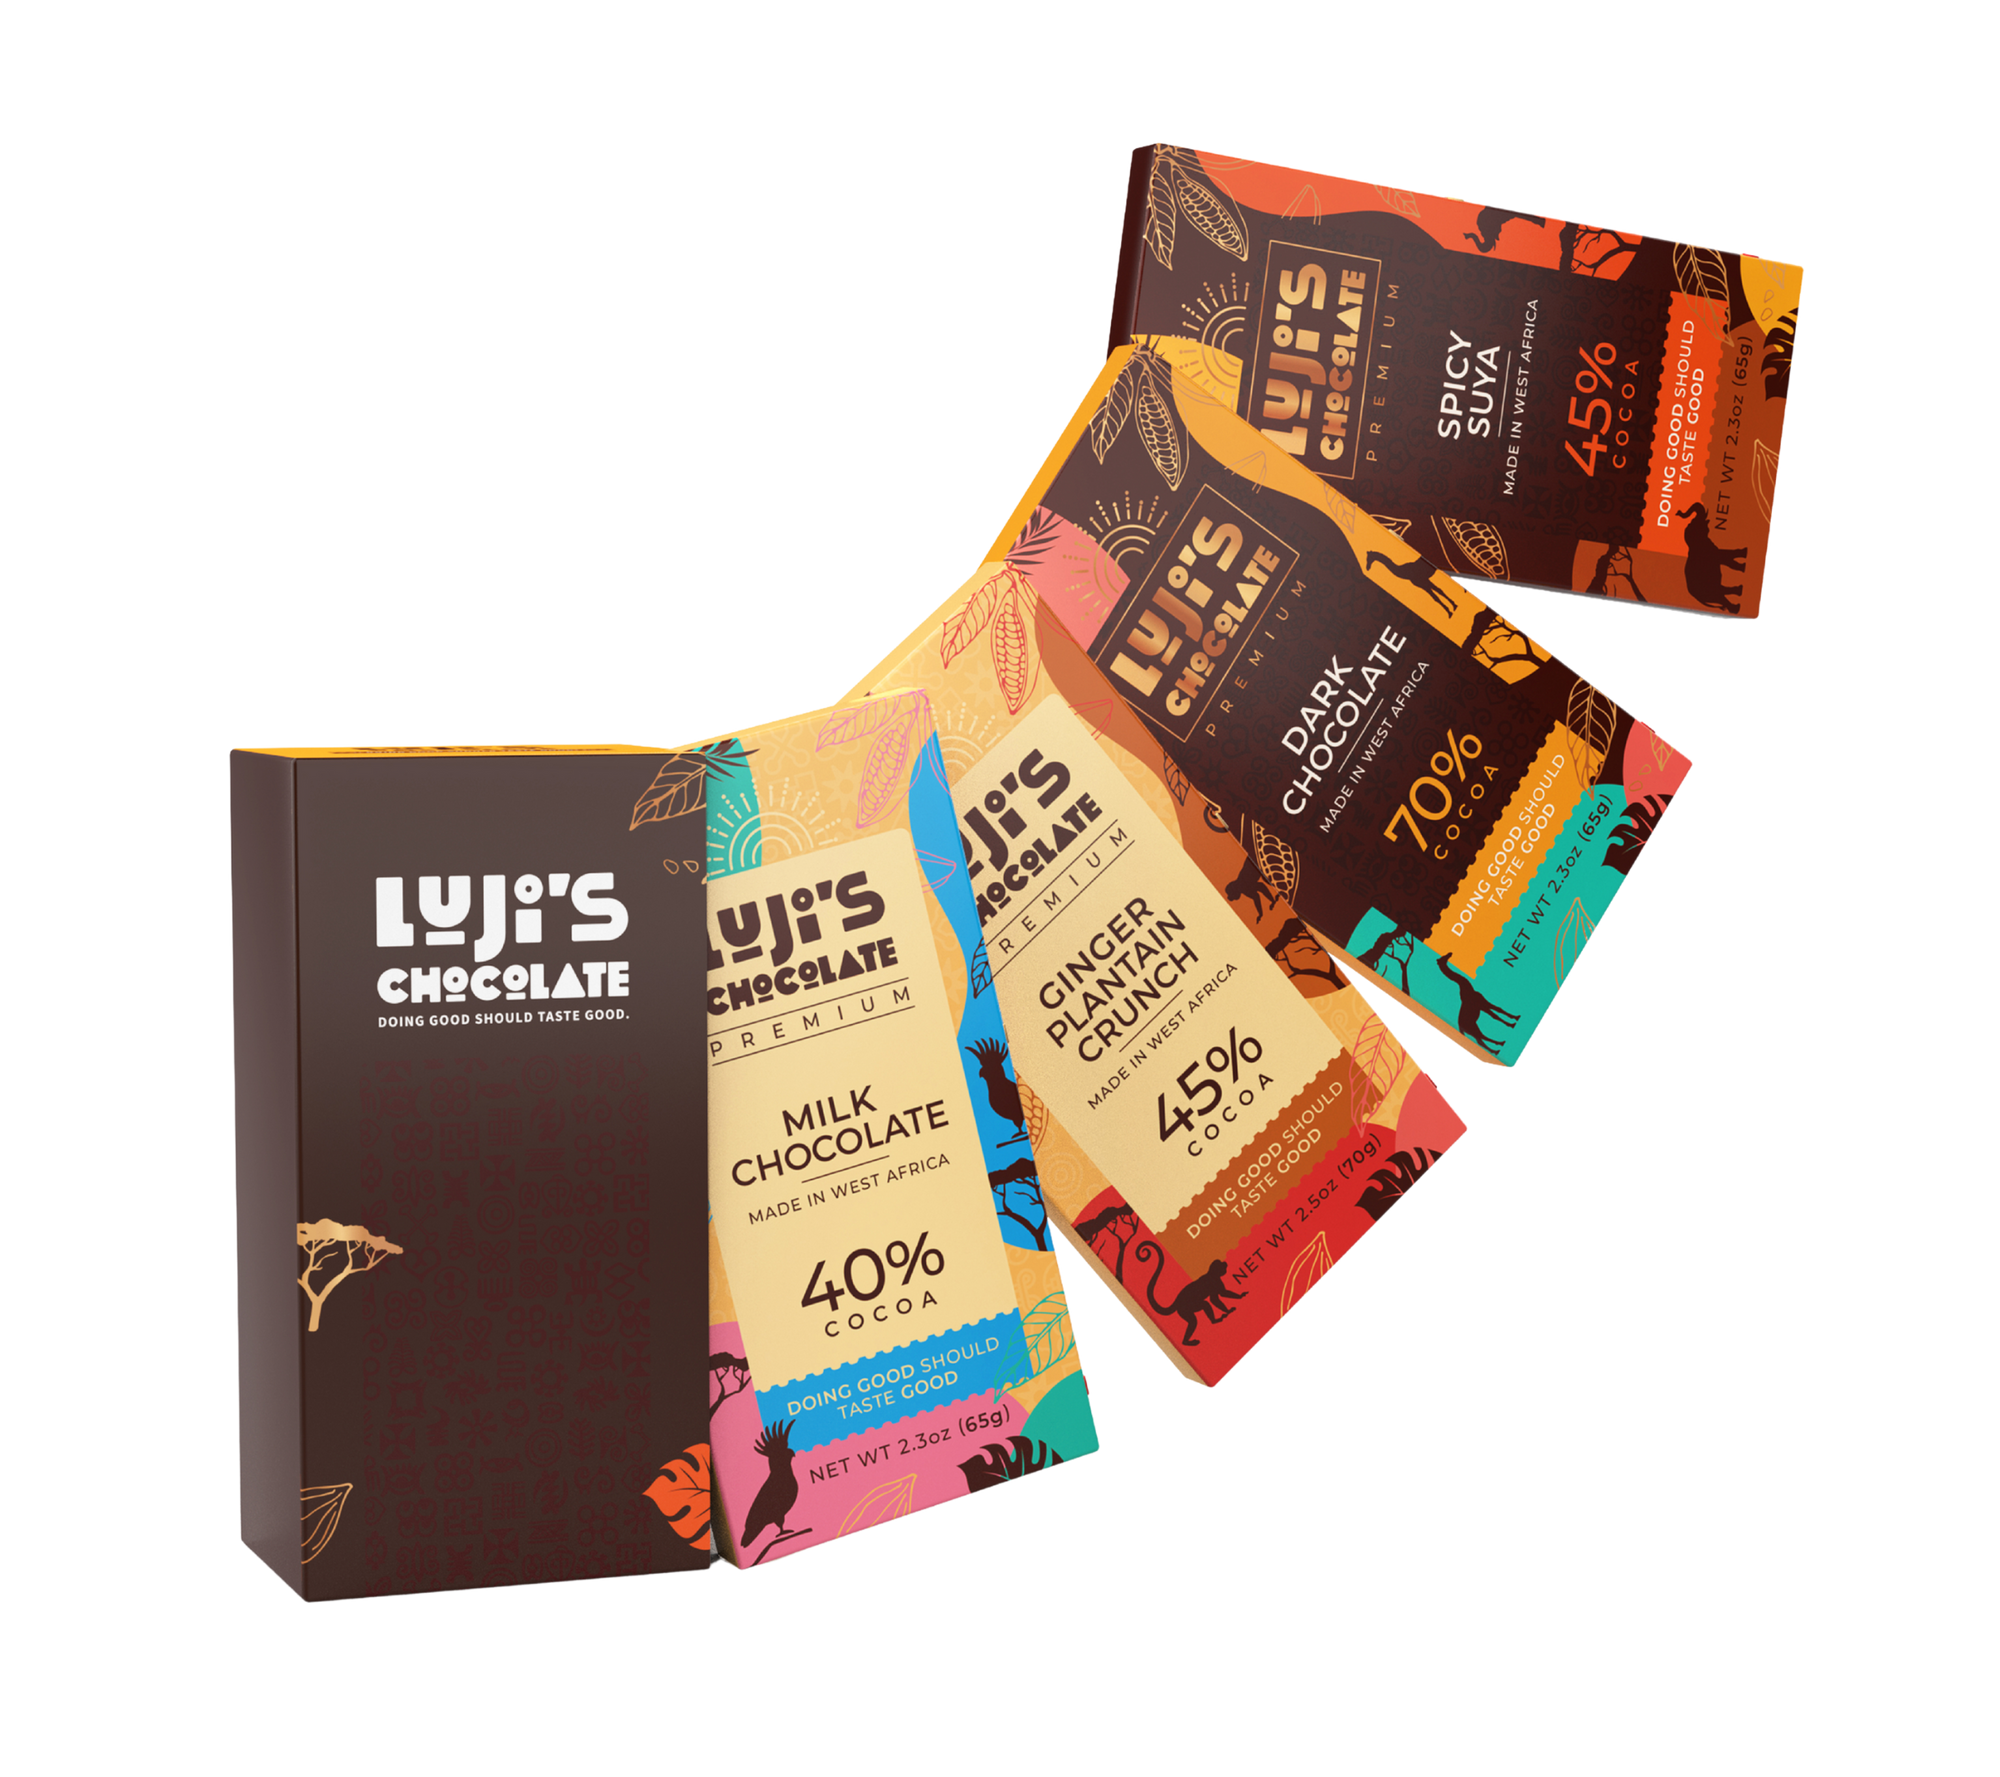 An array of Luji's Chocolate bars laid out diagonally, showcasing vibrant wrappers with African-inspired patterns for flavors including Dark Chocolate, Milk Chocolate, Ginger Plantain Crunch, and Spicy Suya